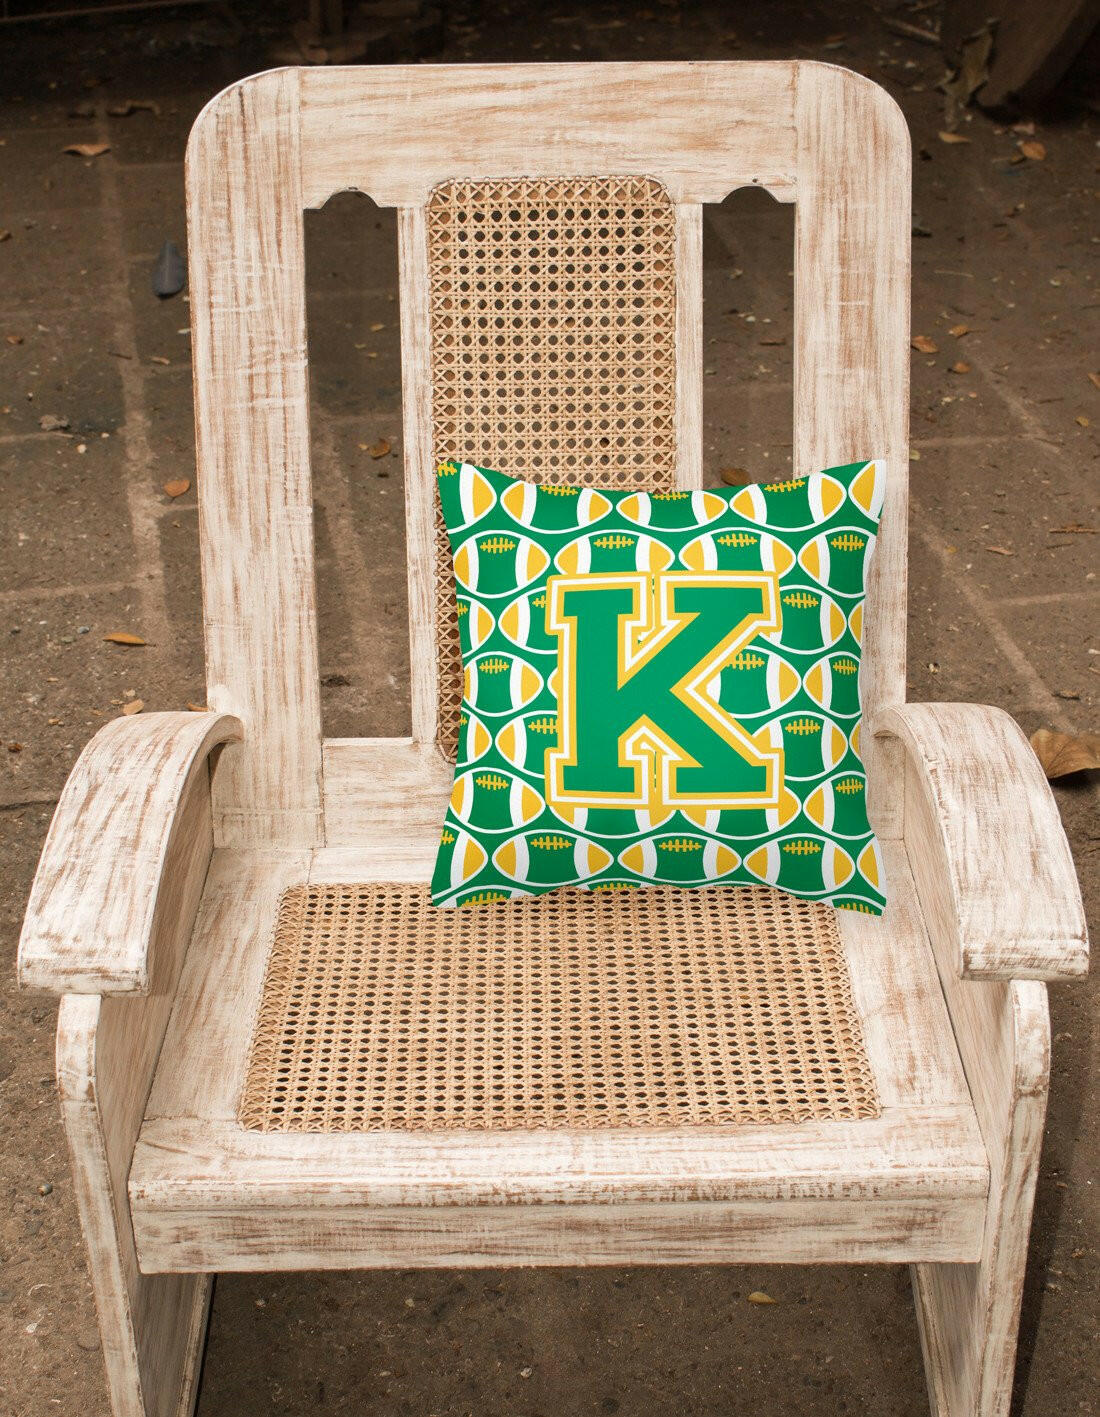 Letter K Football Green and Gold Fabric Decorative Pillow CJ1069-KPW1414 by Caroline's Treasures